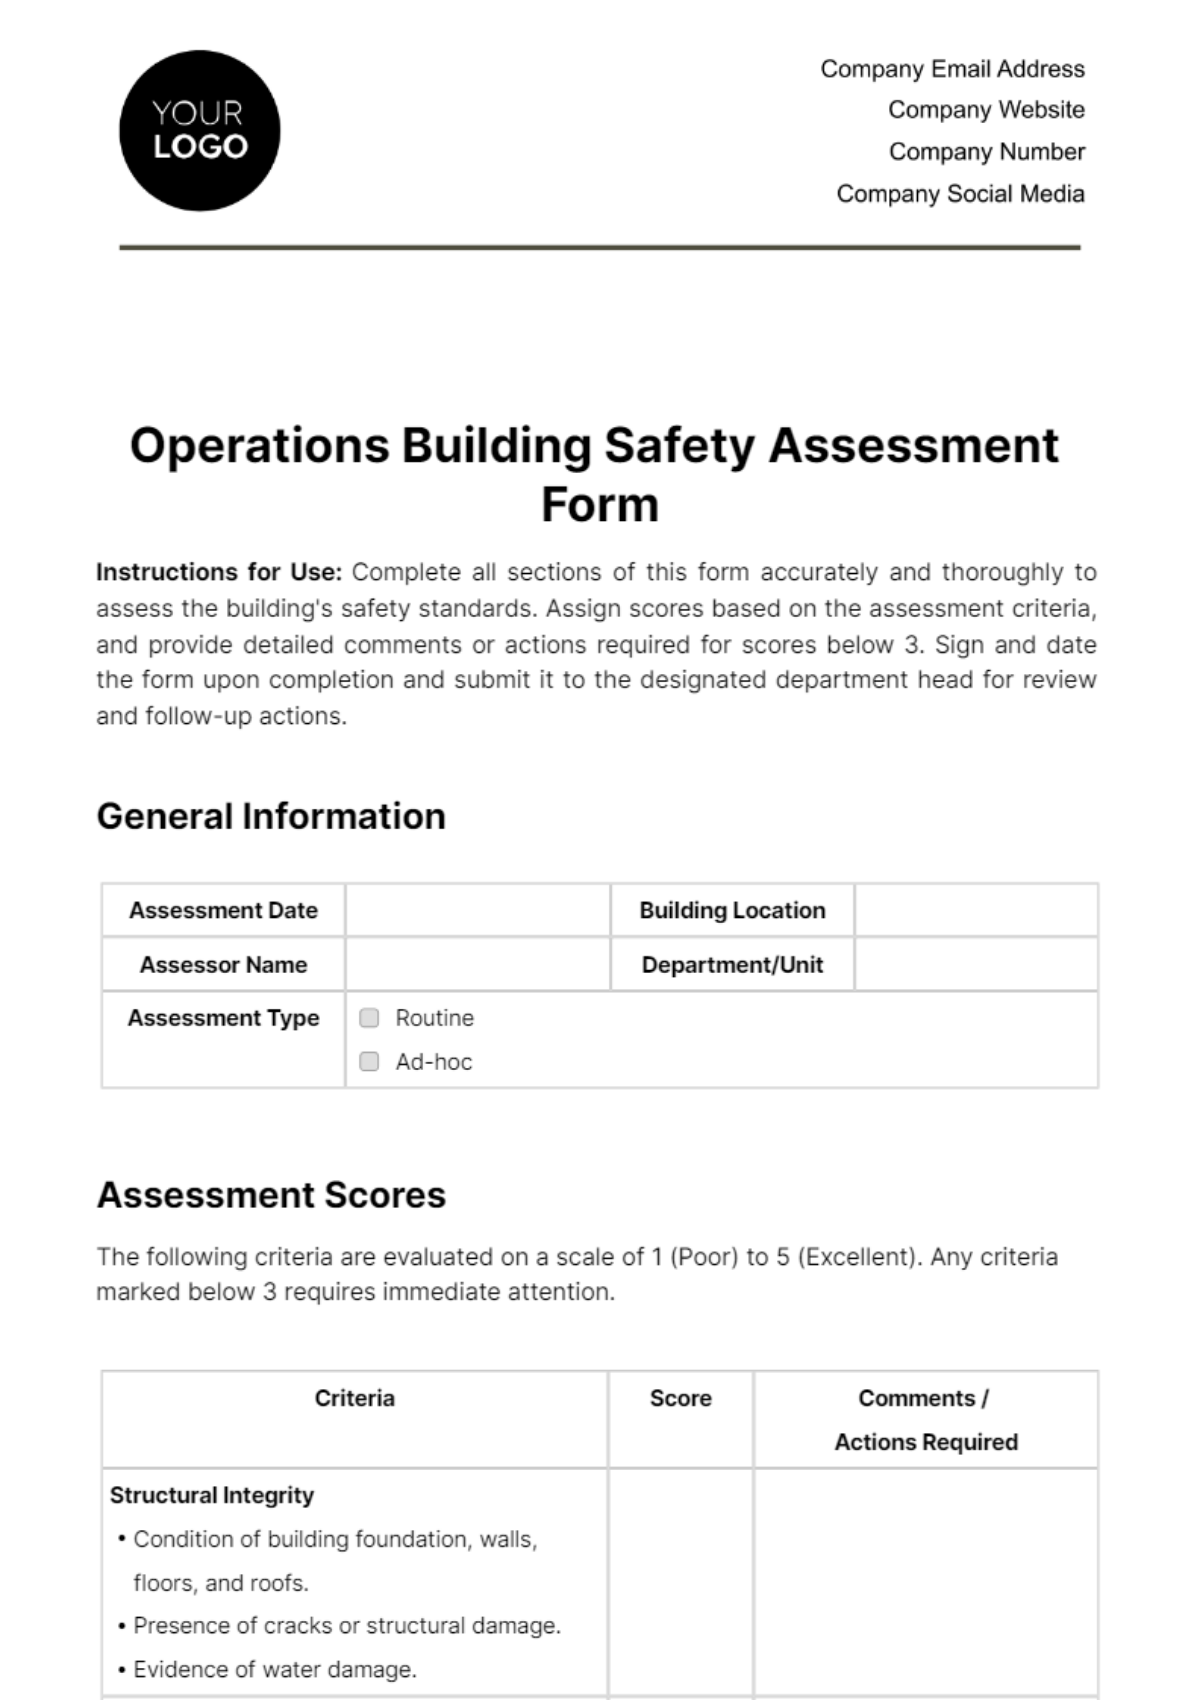 Operations Building Safety Assessment Form Template